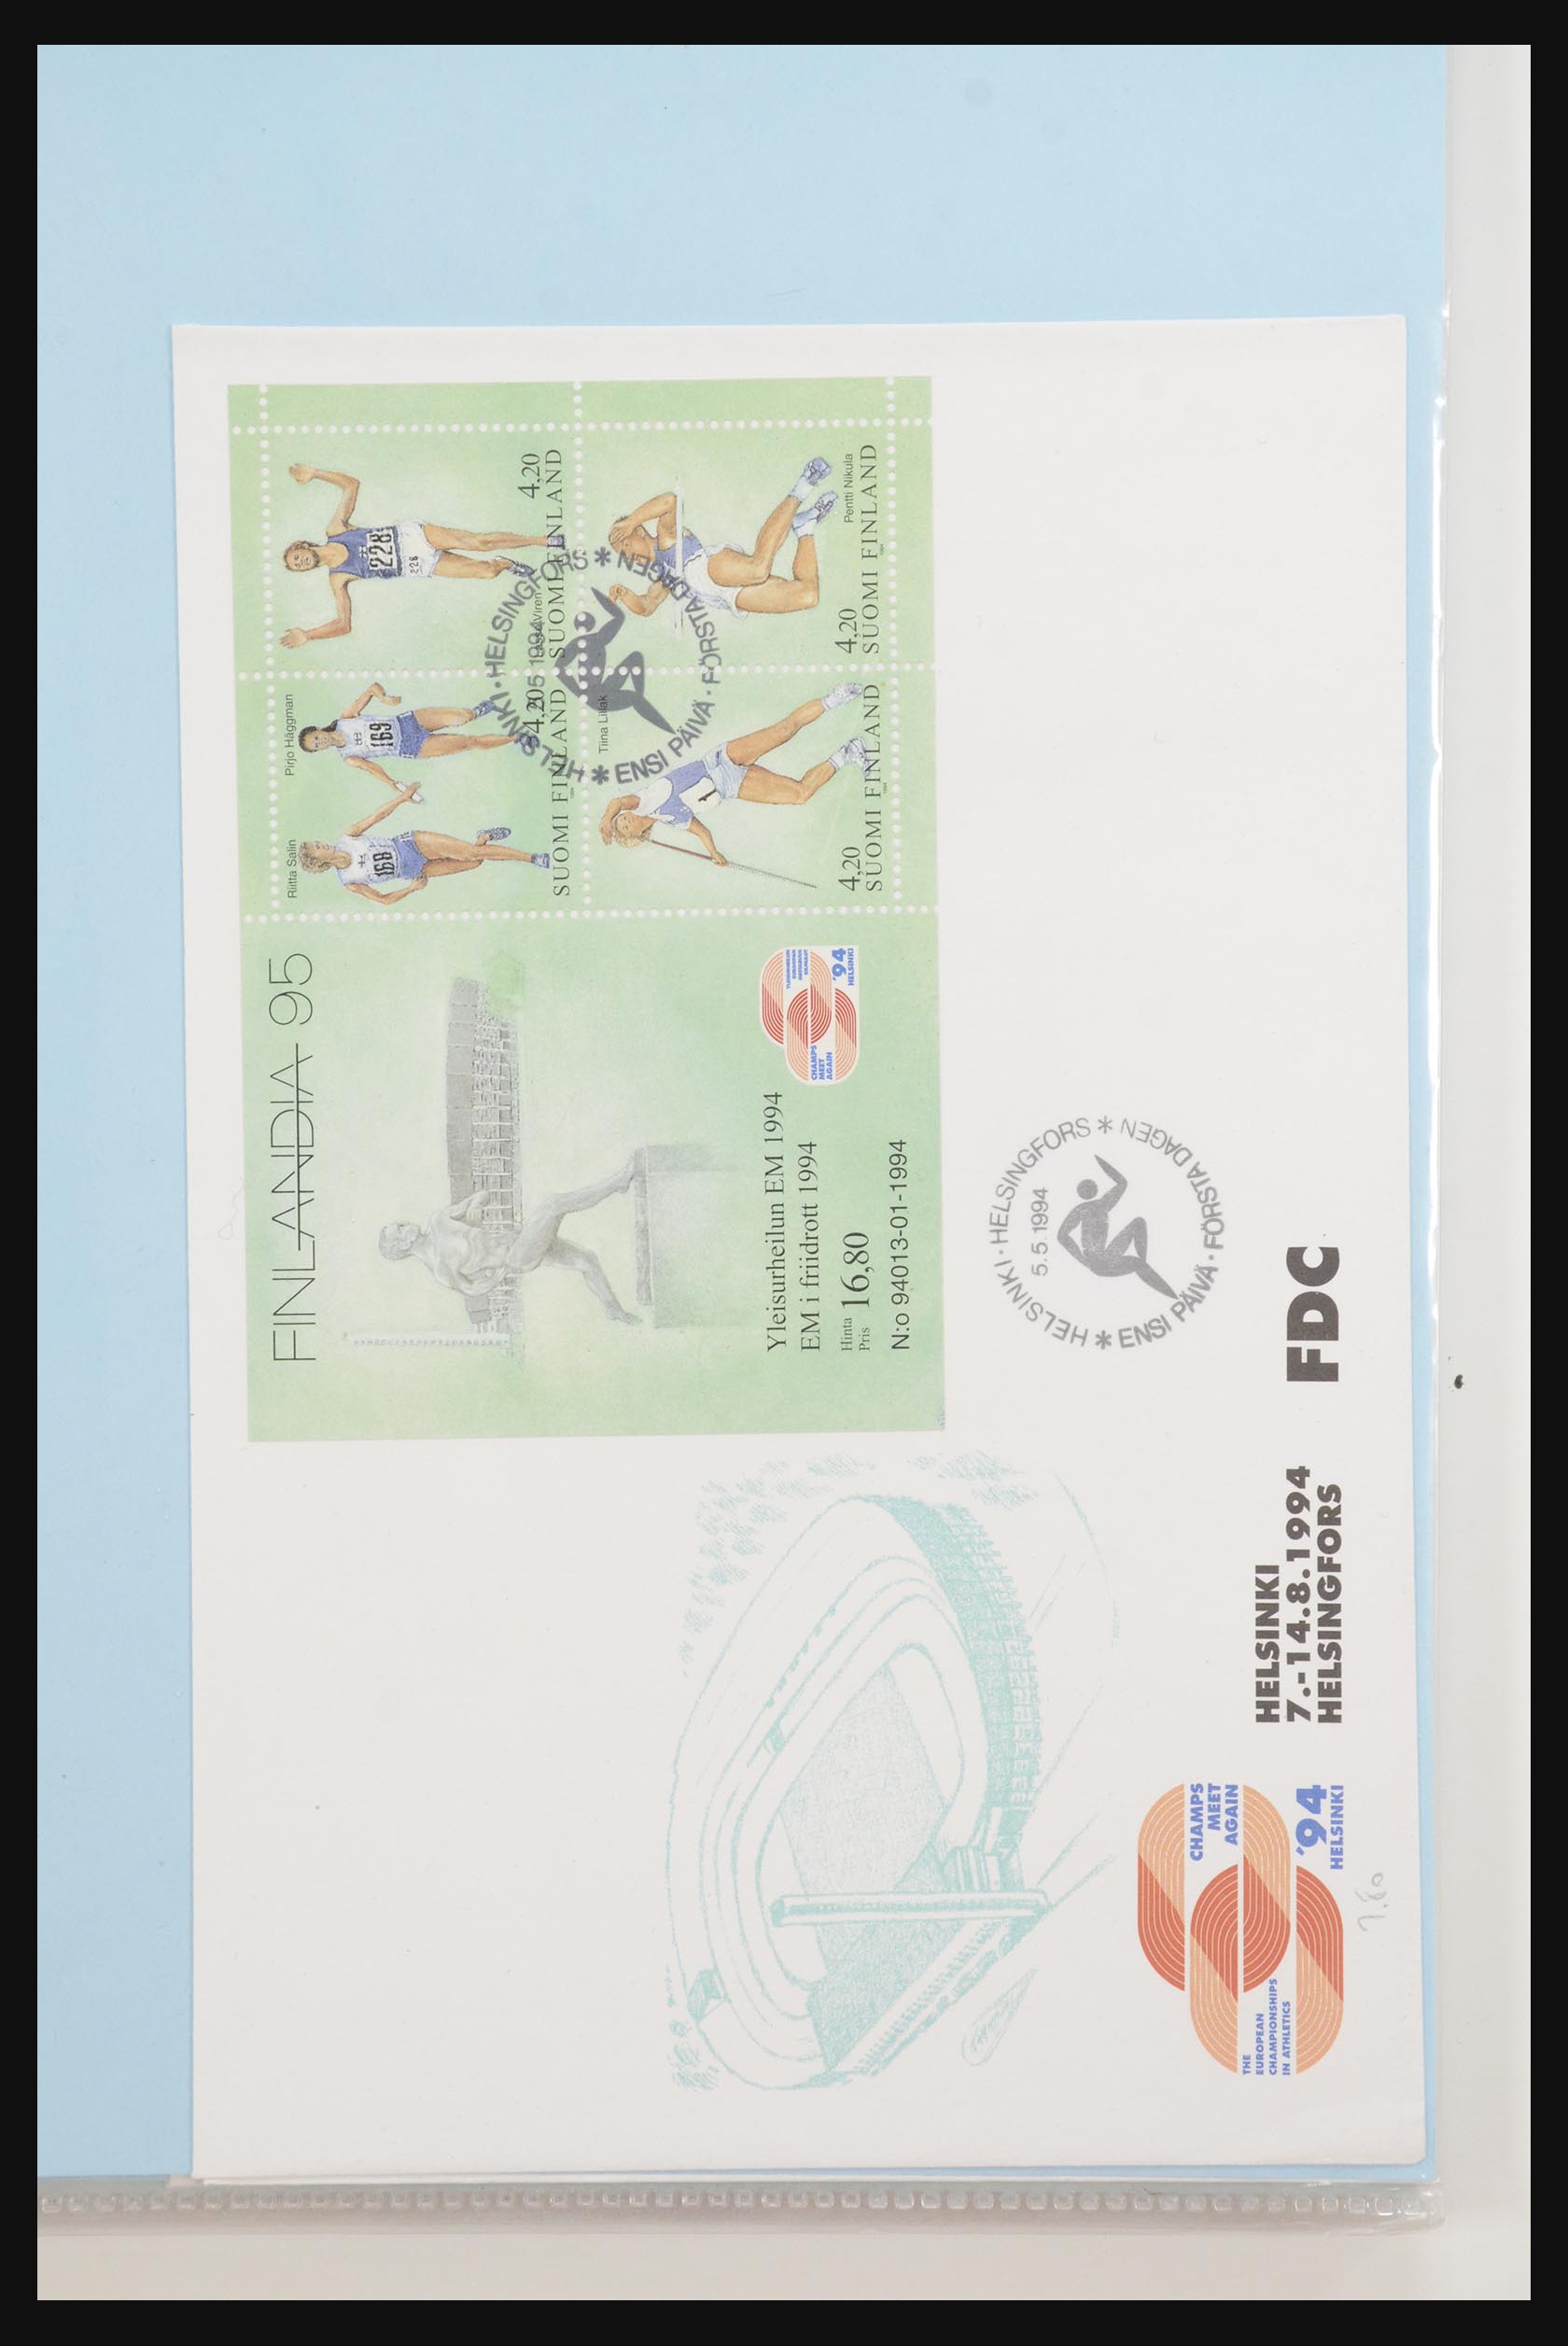 31915 011 - 31915 Western Europe souvenir sheets and stamp booklets on FDC.